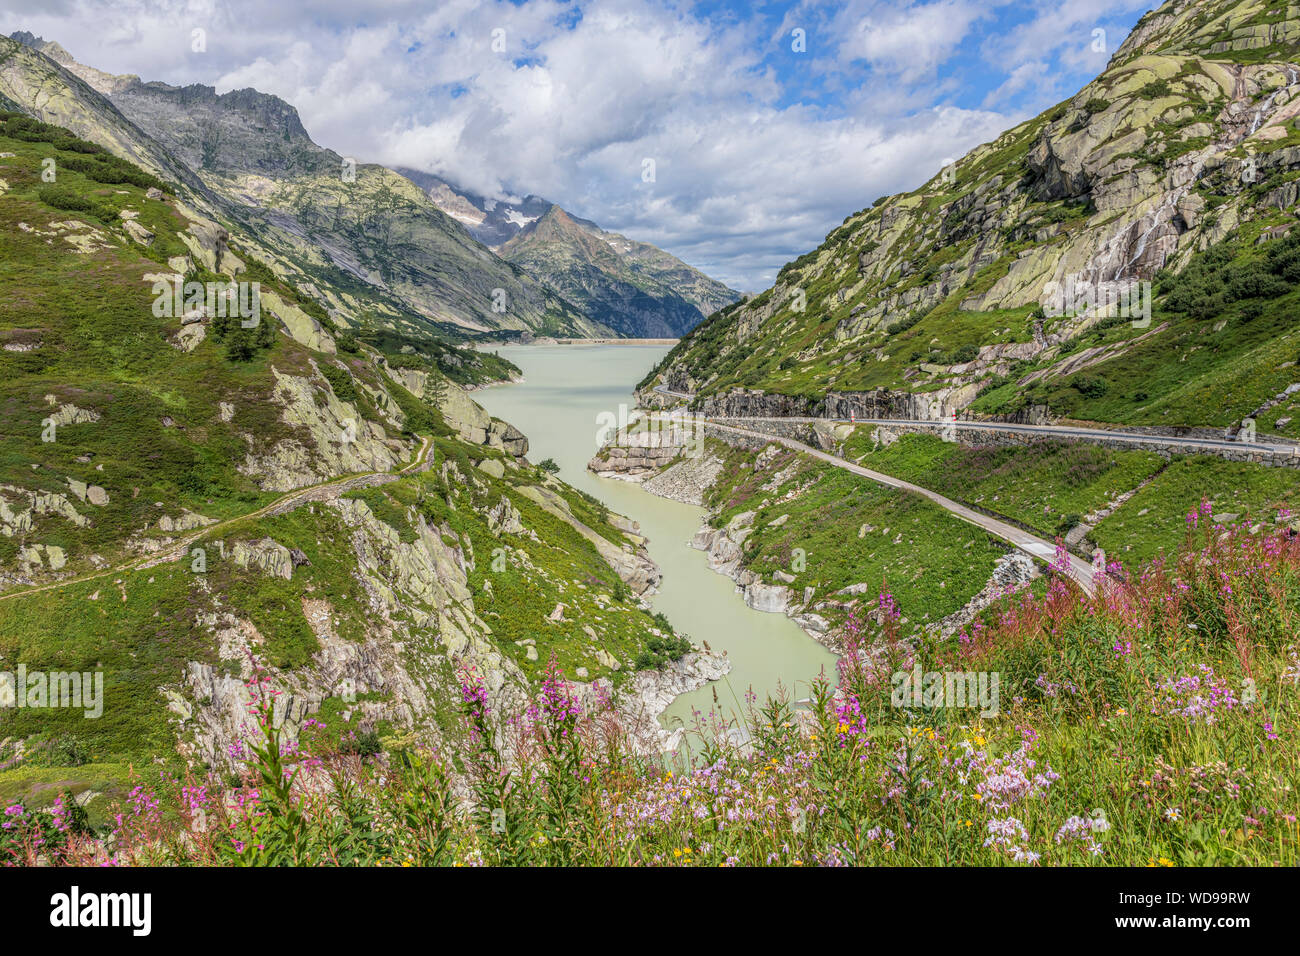 Page 5 - Berner Oberland High Resolution Stock Photography and Images -  Alamy